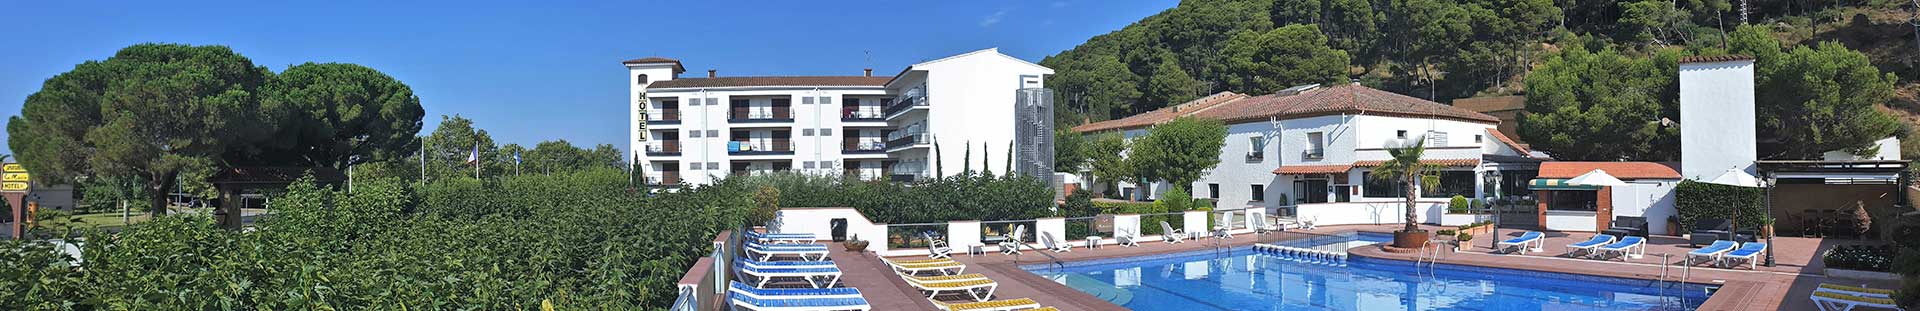 Spacious and bright rooms in Estartit, in the heart of the Emporda and the Costa Brava in Girona